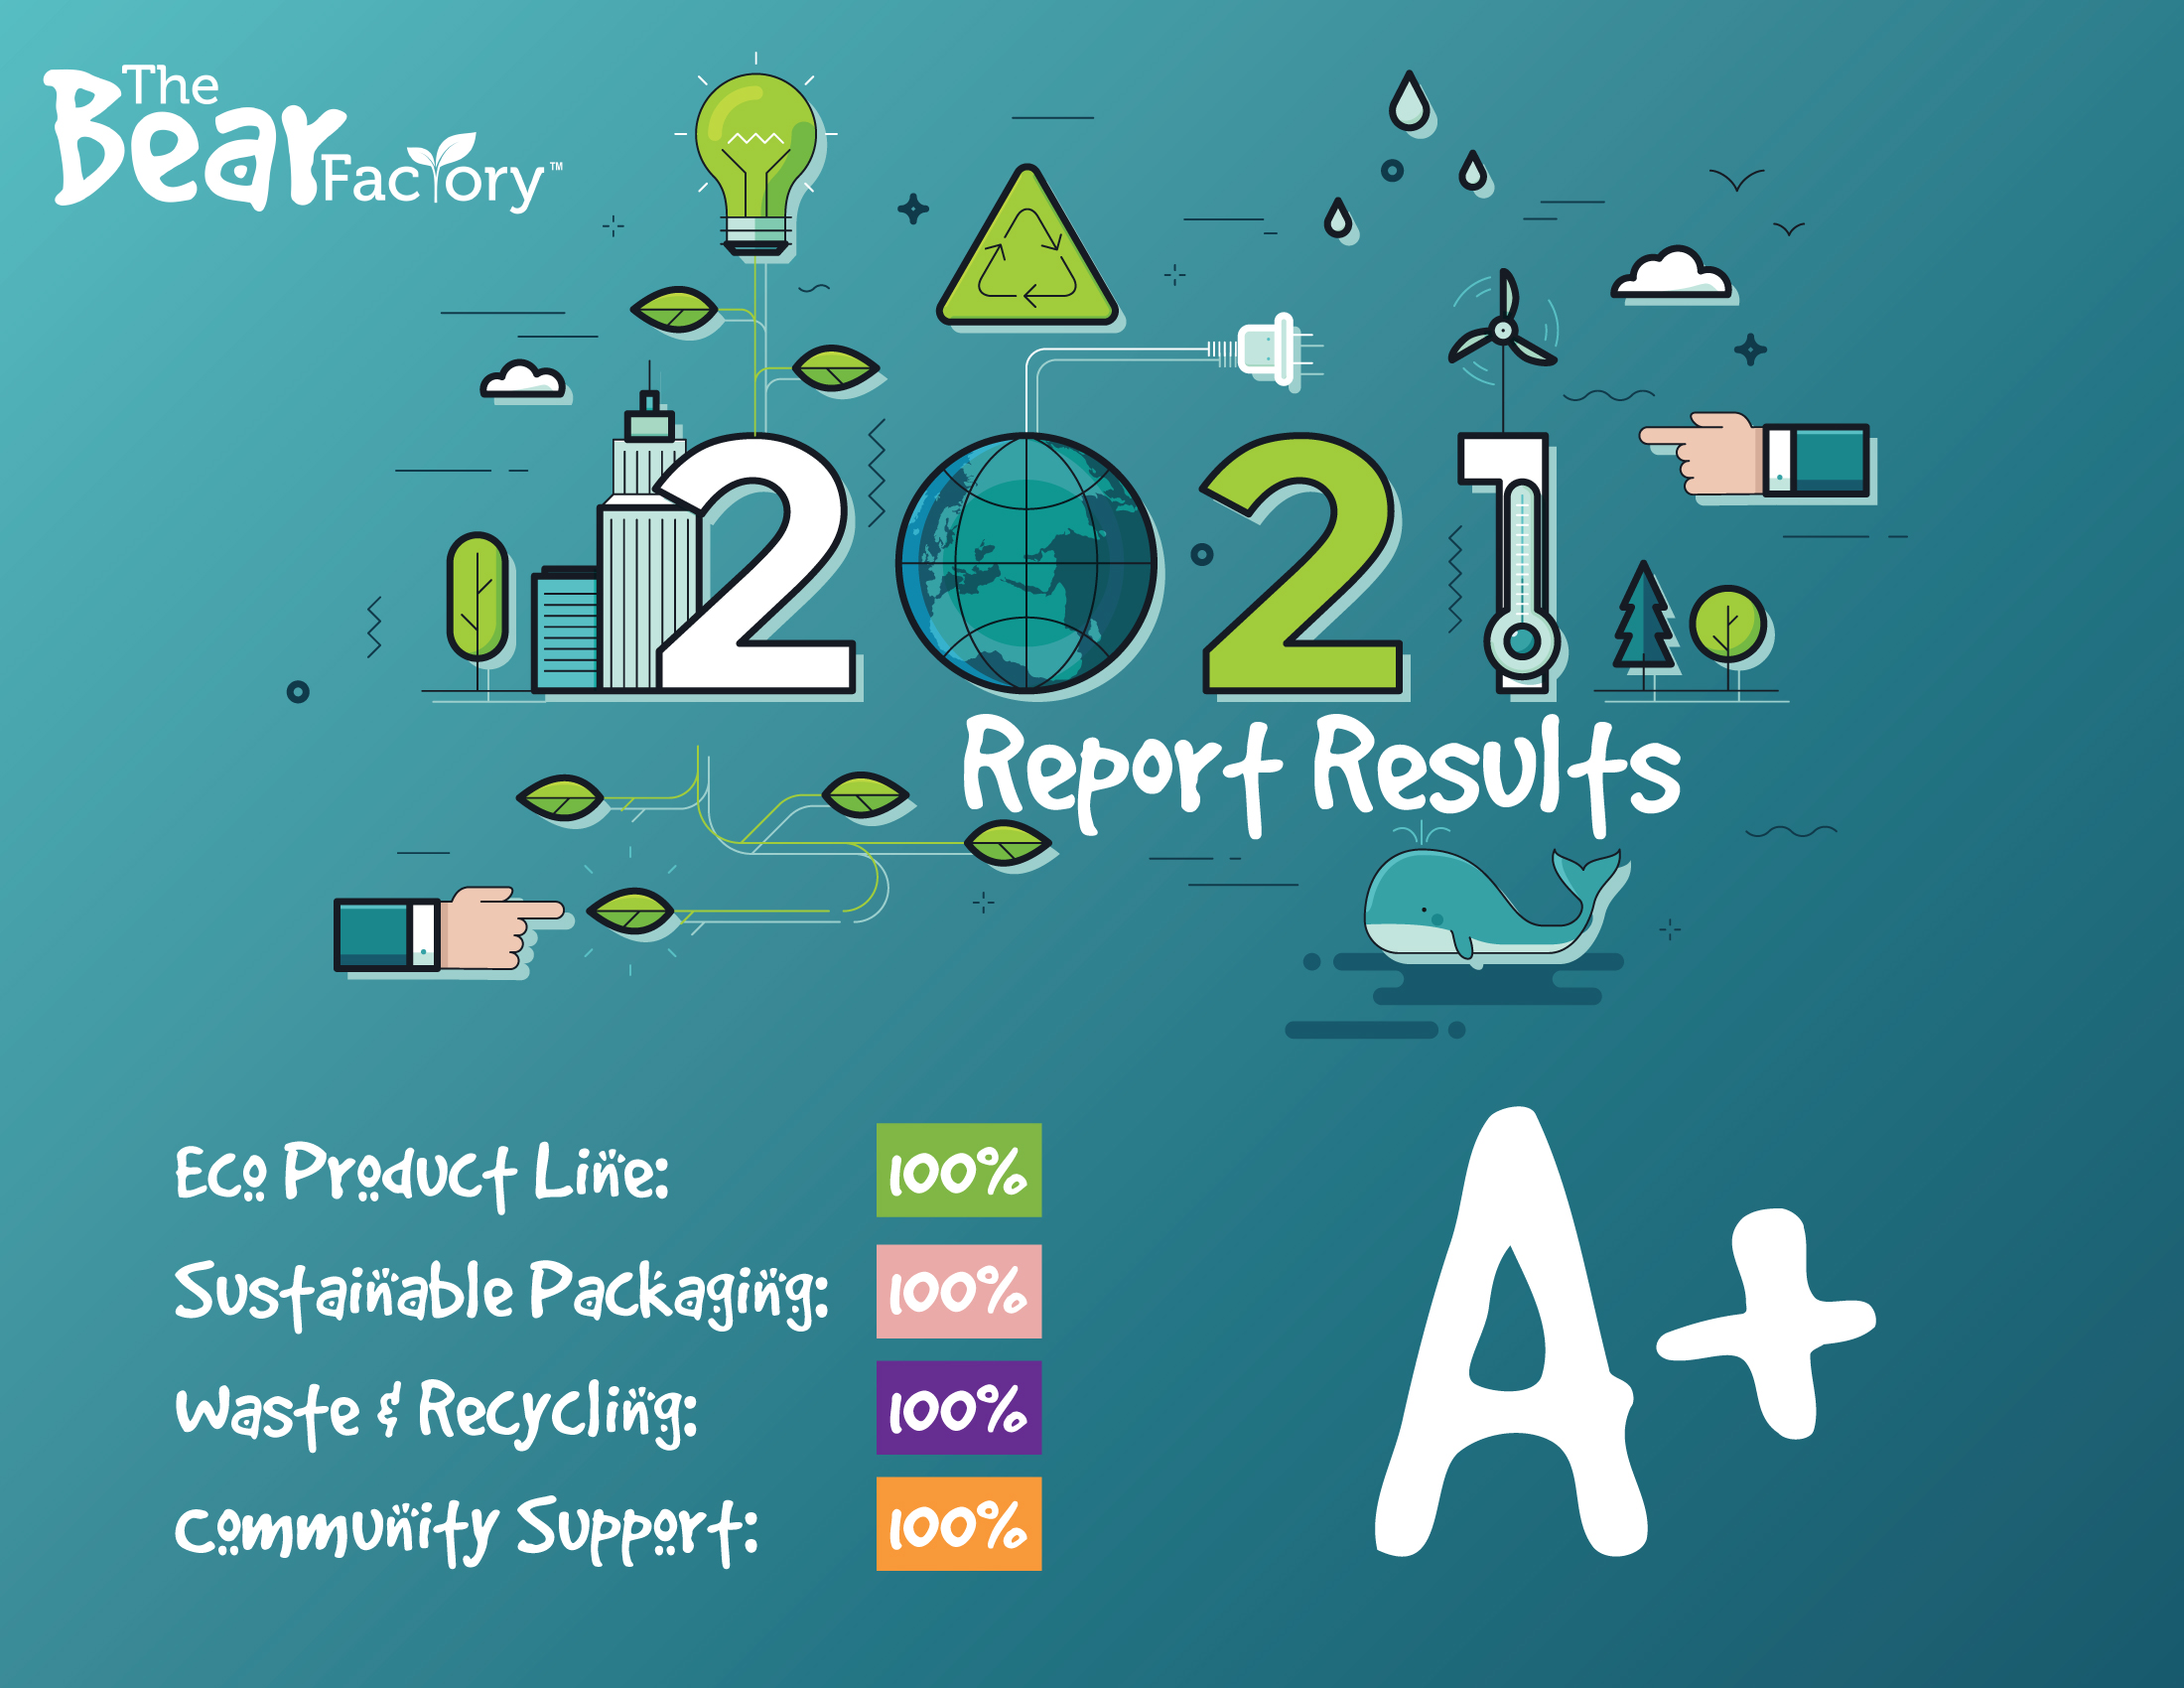 2021 Sustainability Report Results A+ Eco Product Line 100% Sustainable Packaging 100% Waste and Recycling 100% Community Support 100%